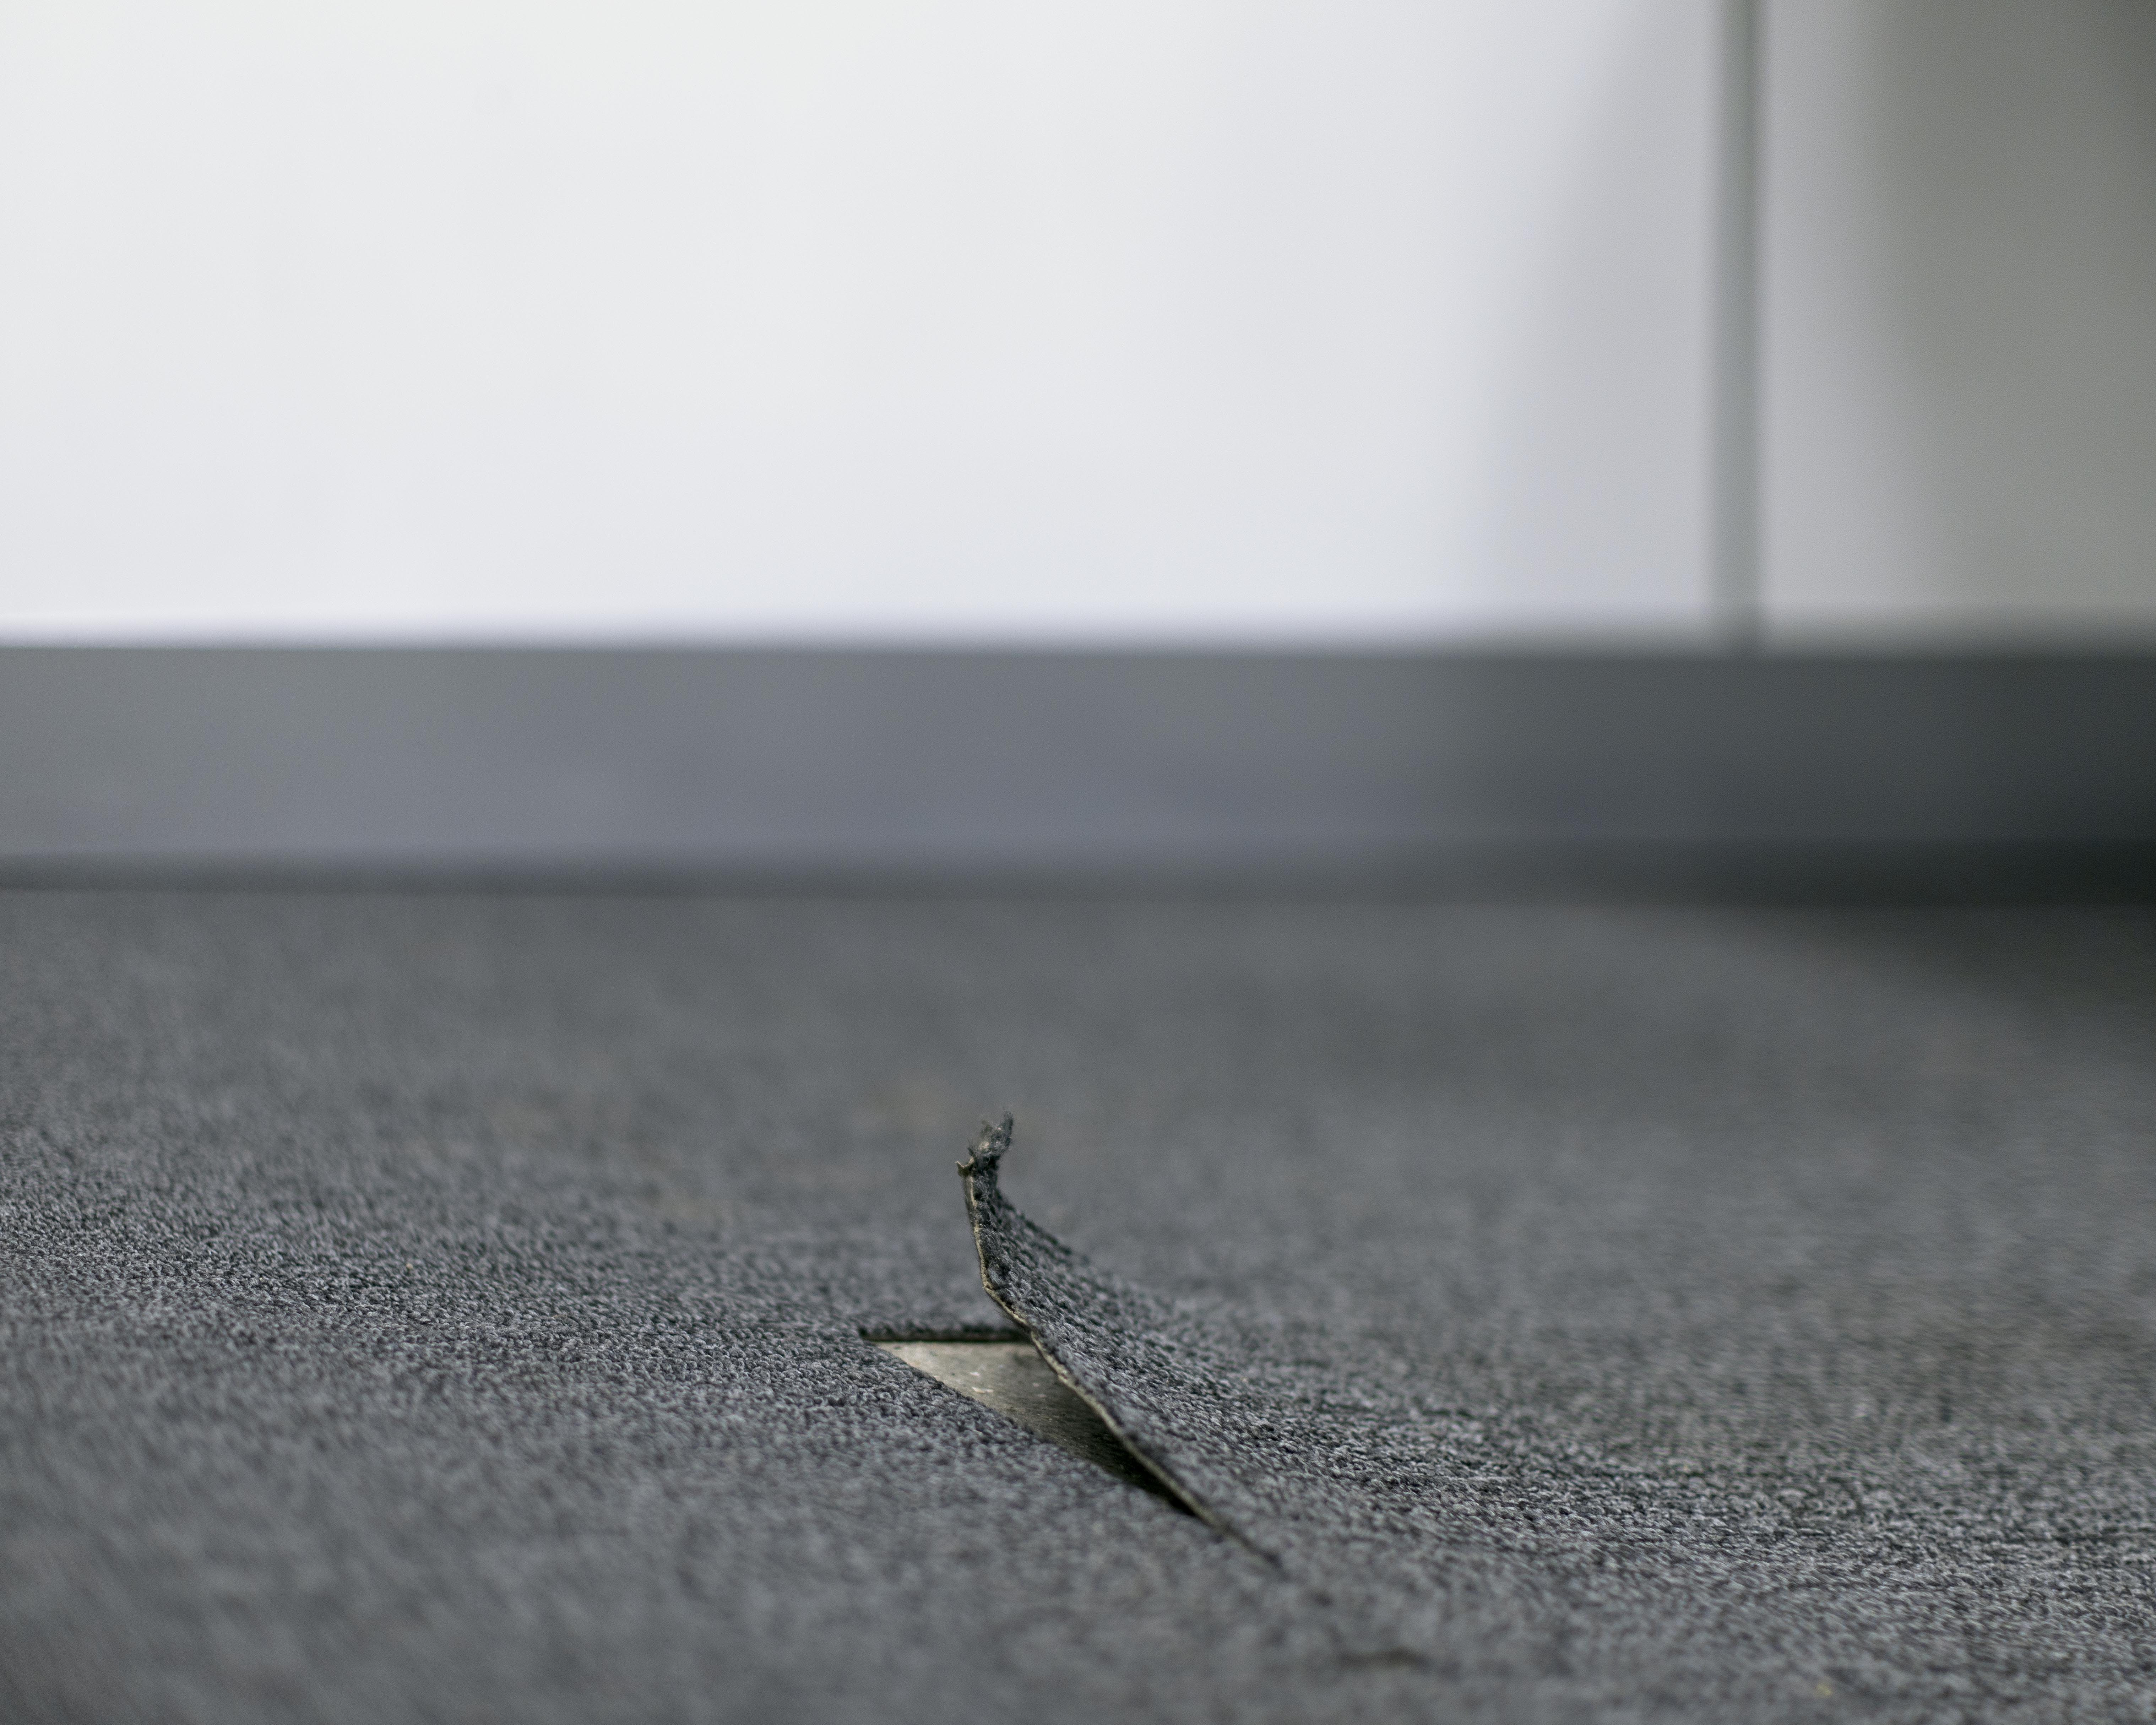 fine art photo of a gray carpet, in the middle of the photo the corner of the carpet is lifting upwards